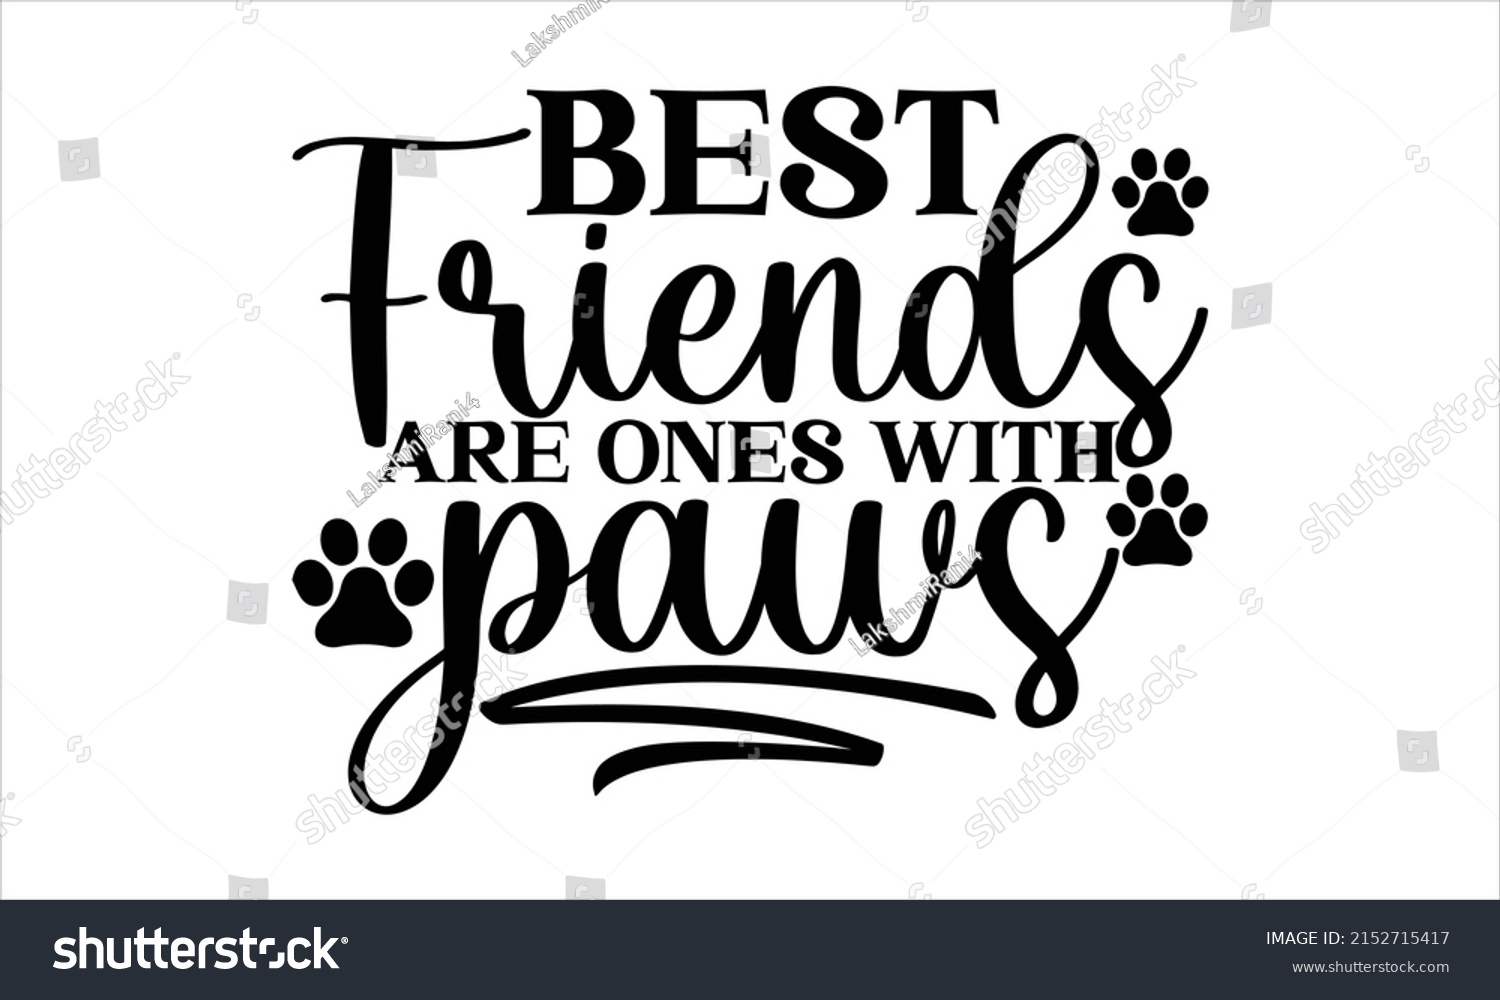 SVG of   Best friends are ones with paws -   Lettering design for greeting banners, Mouse Pads, Prints, Cards and Posters, Mugs, Notebooks, Floor Pillows and T-shirt prints design. svg